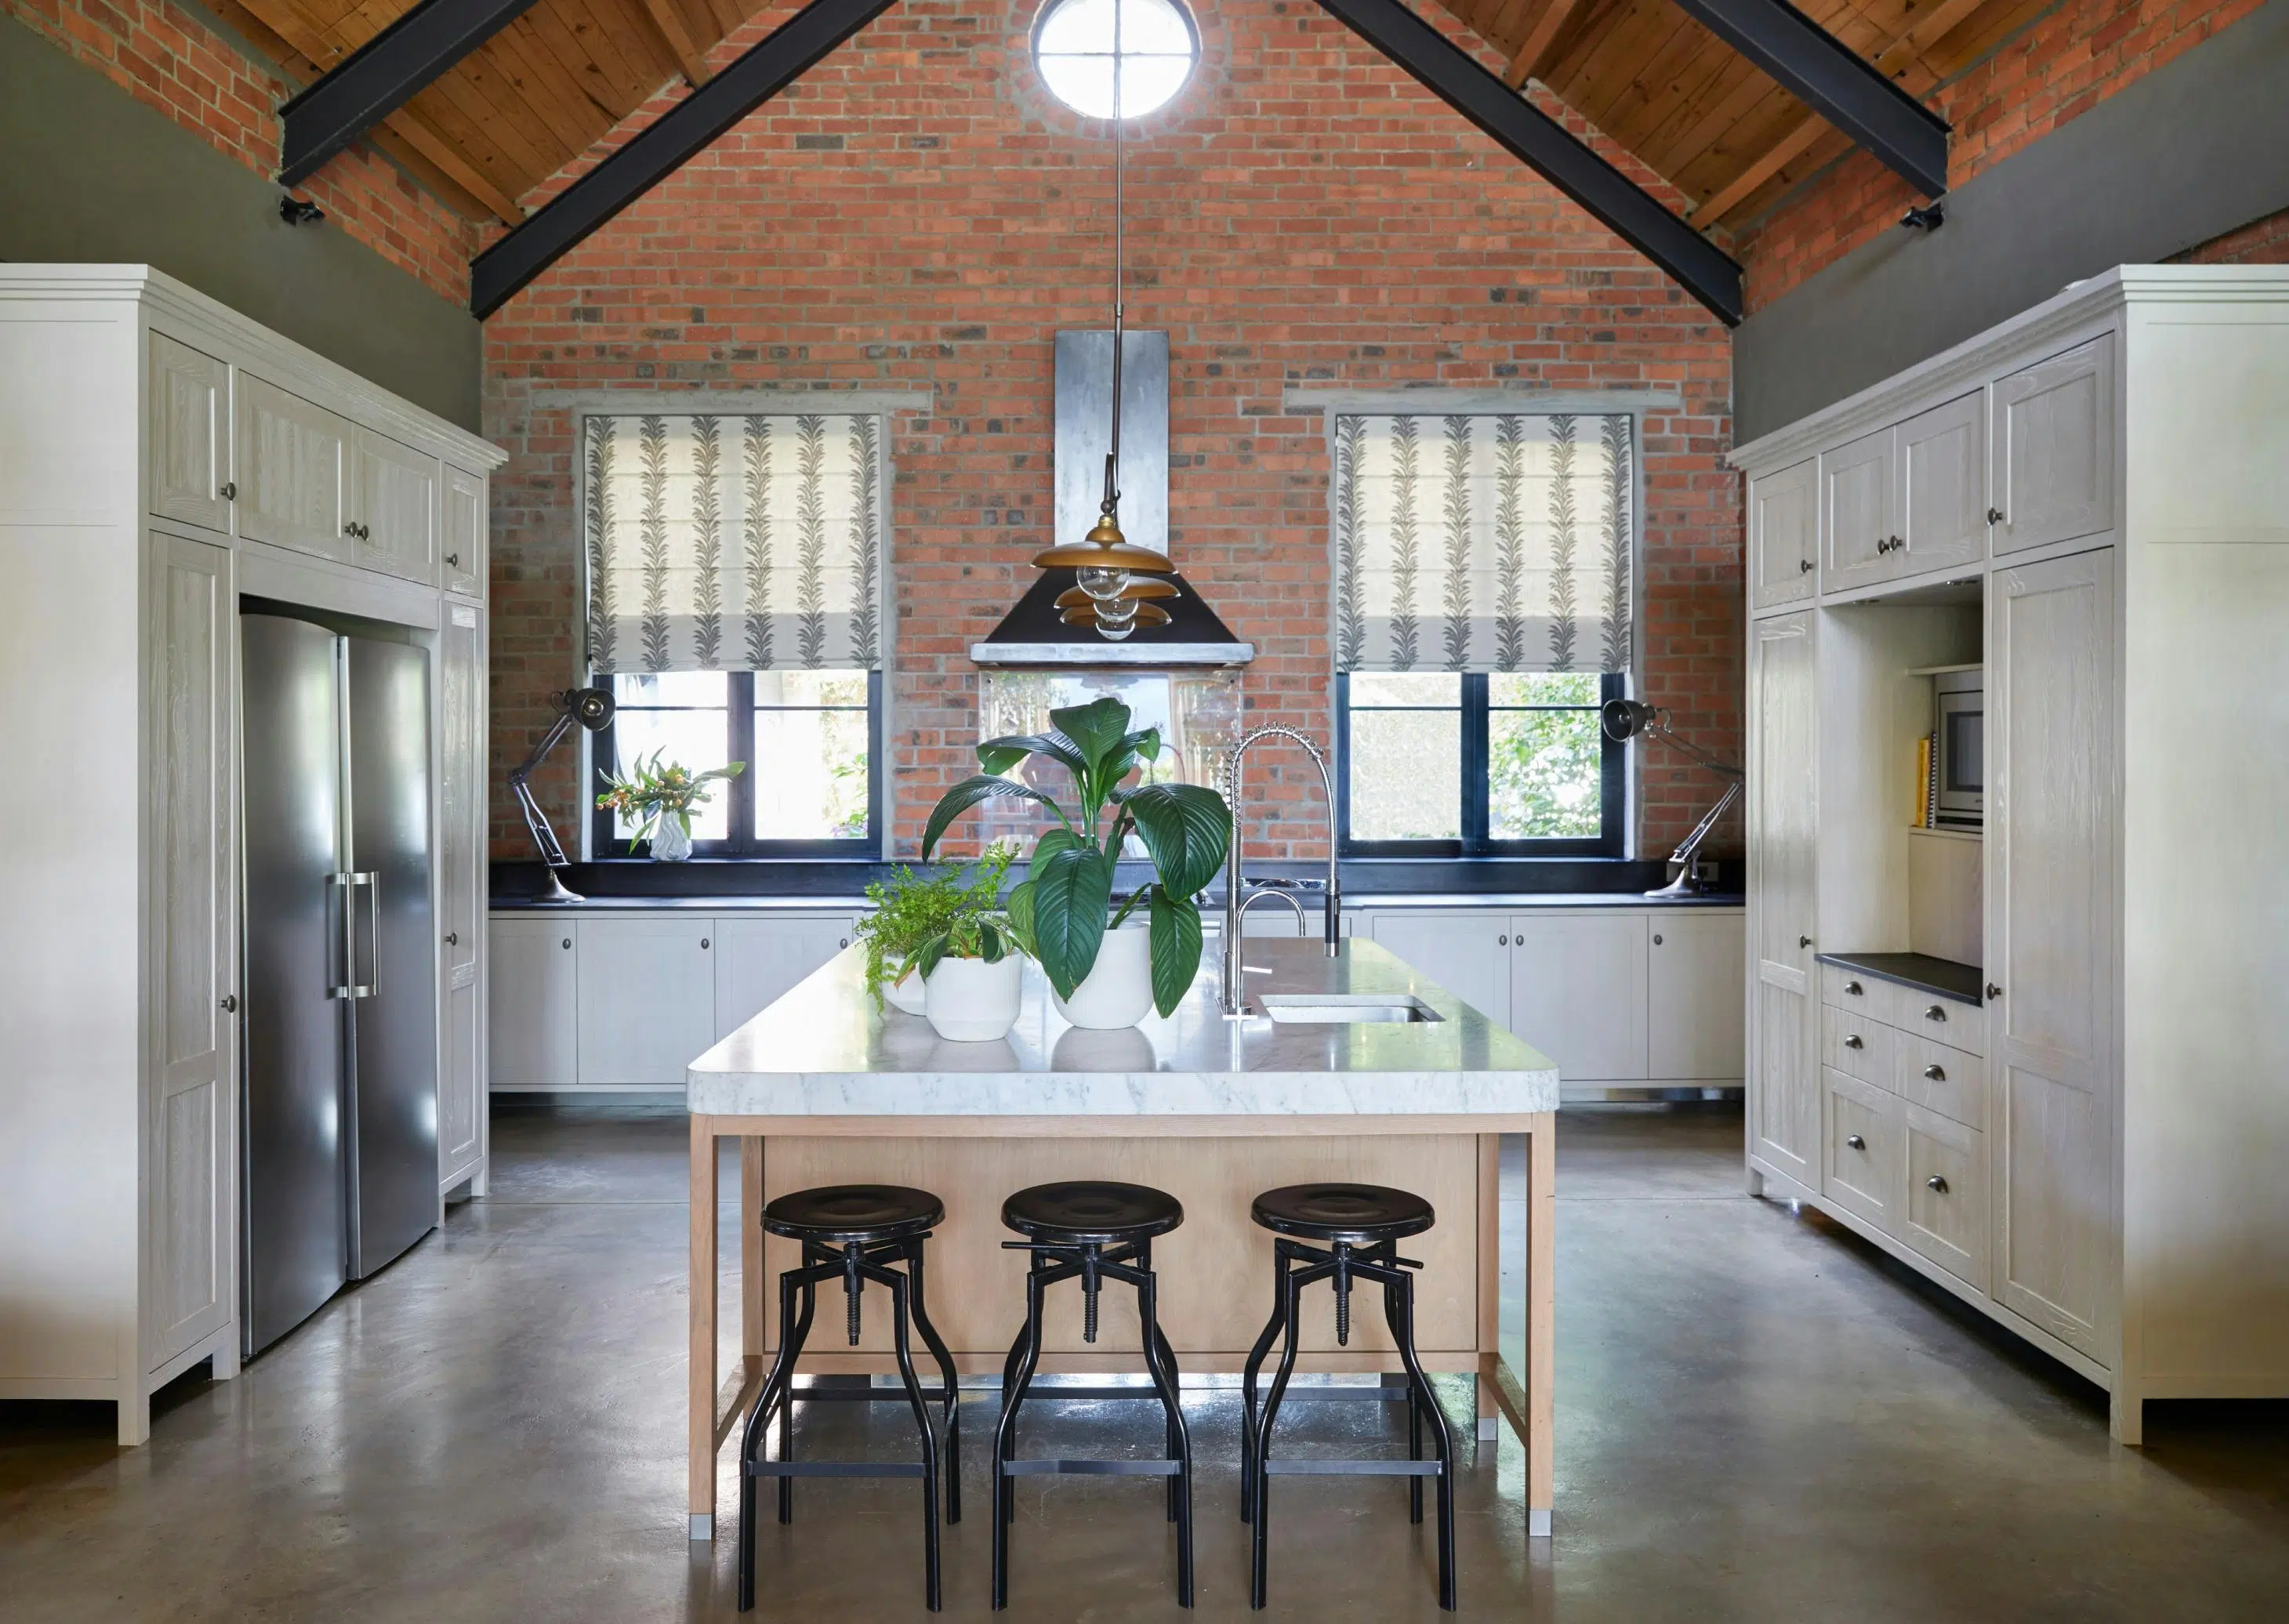 A modern, A-frame kitchen with an exposed brick wall features a central kitchen island and white cabinetry. Bar stools are arranged in front of the island and potted plants sit on its surface.